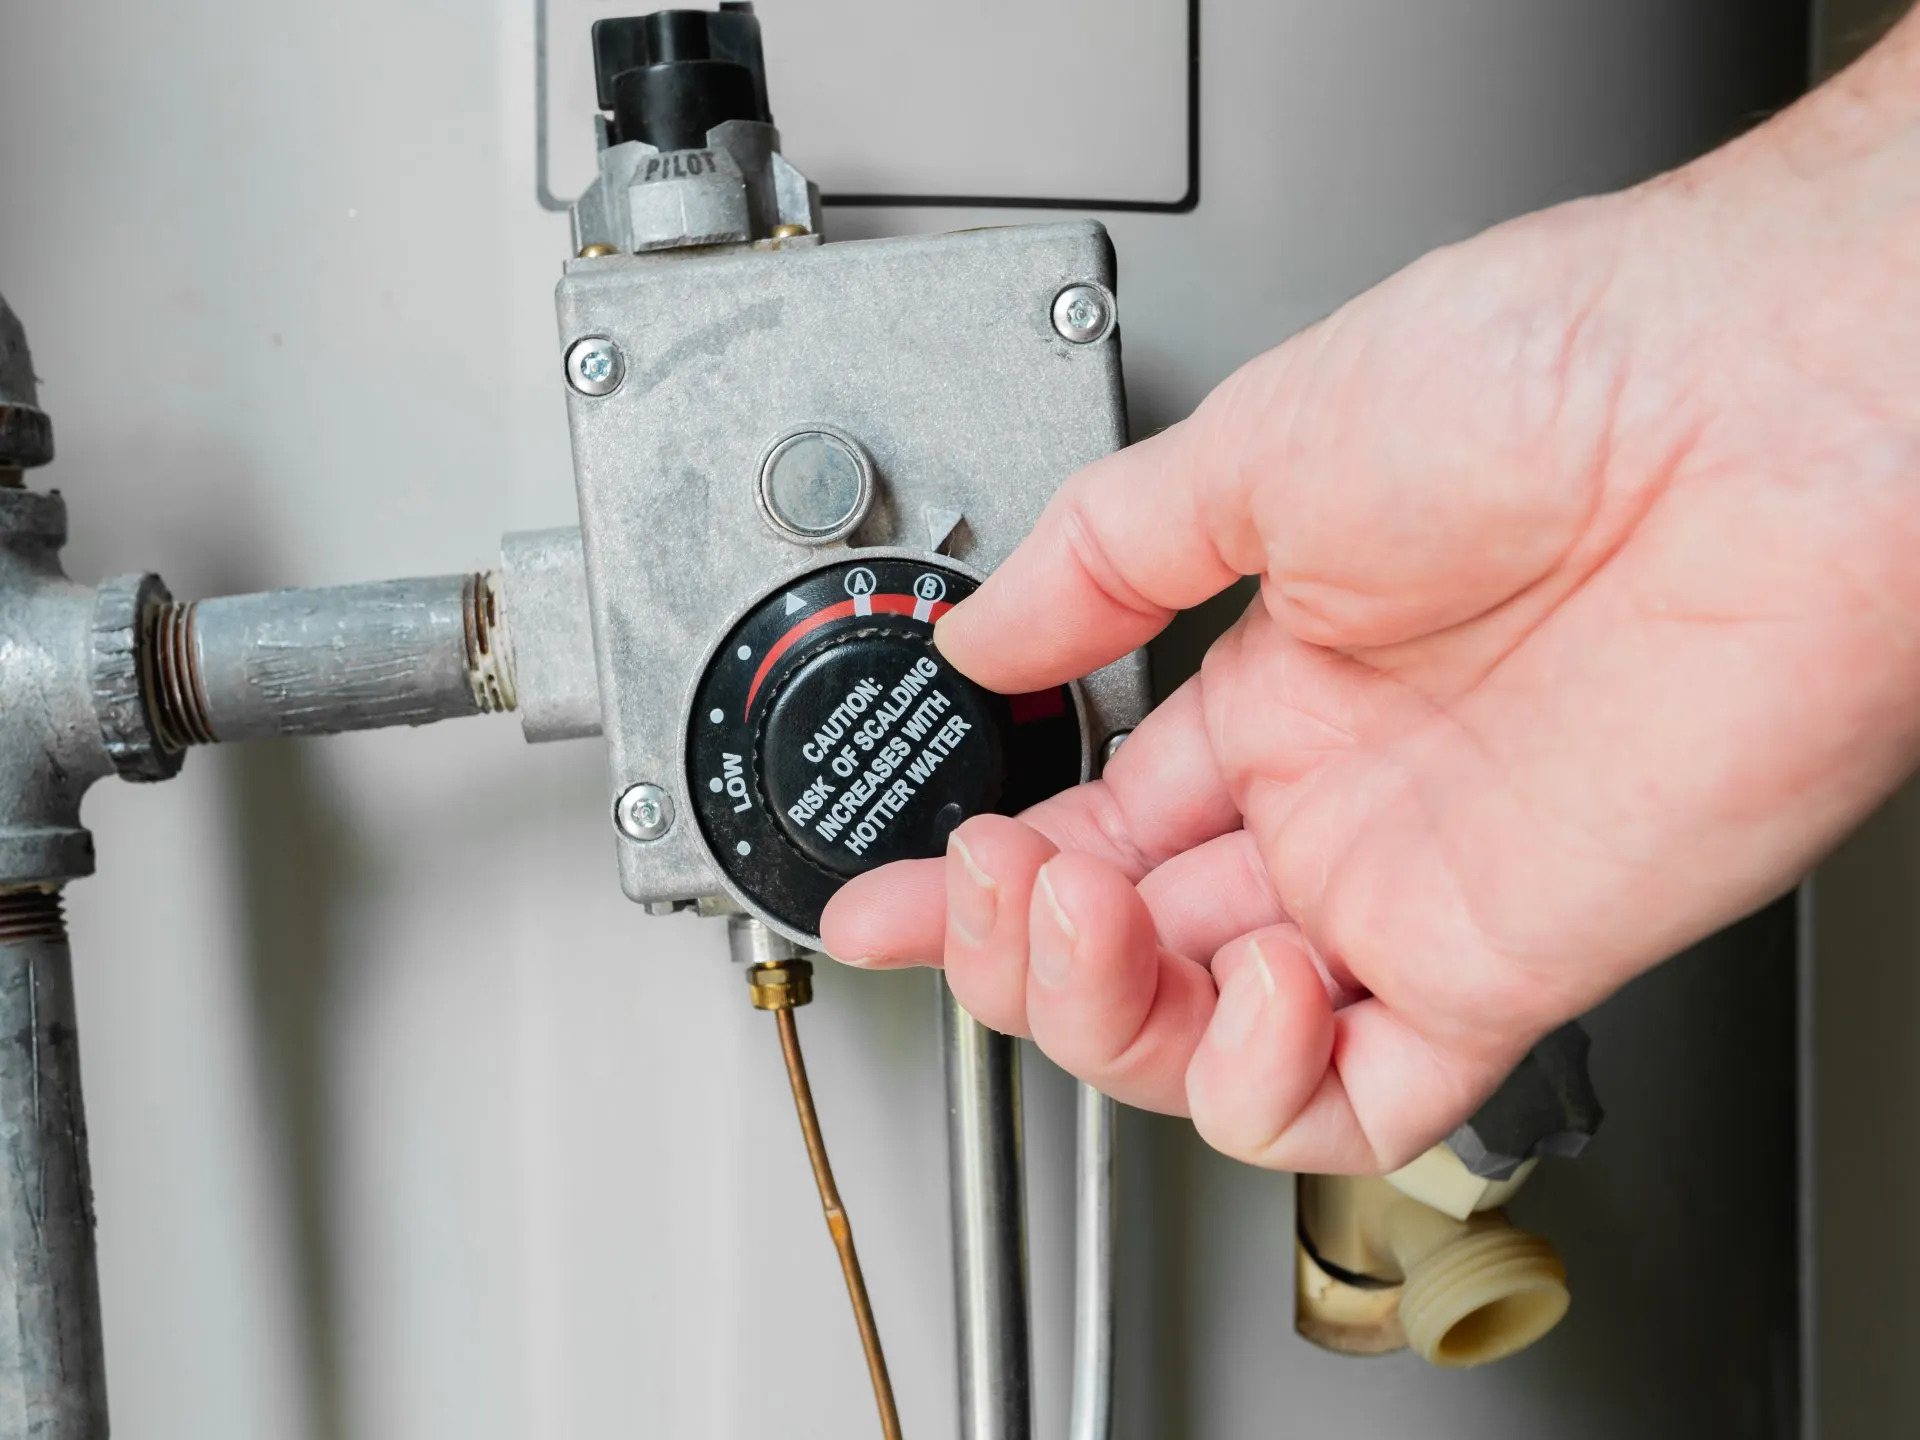 How To Turn Up Temperature On Hot Water Heater